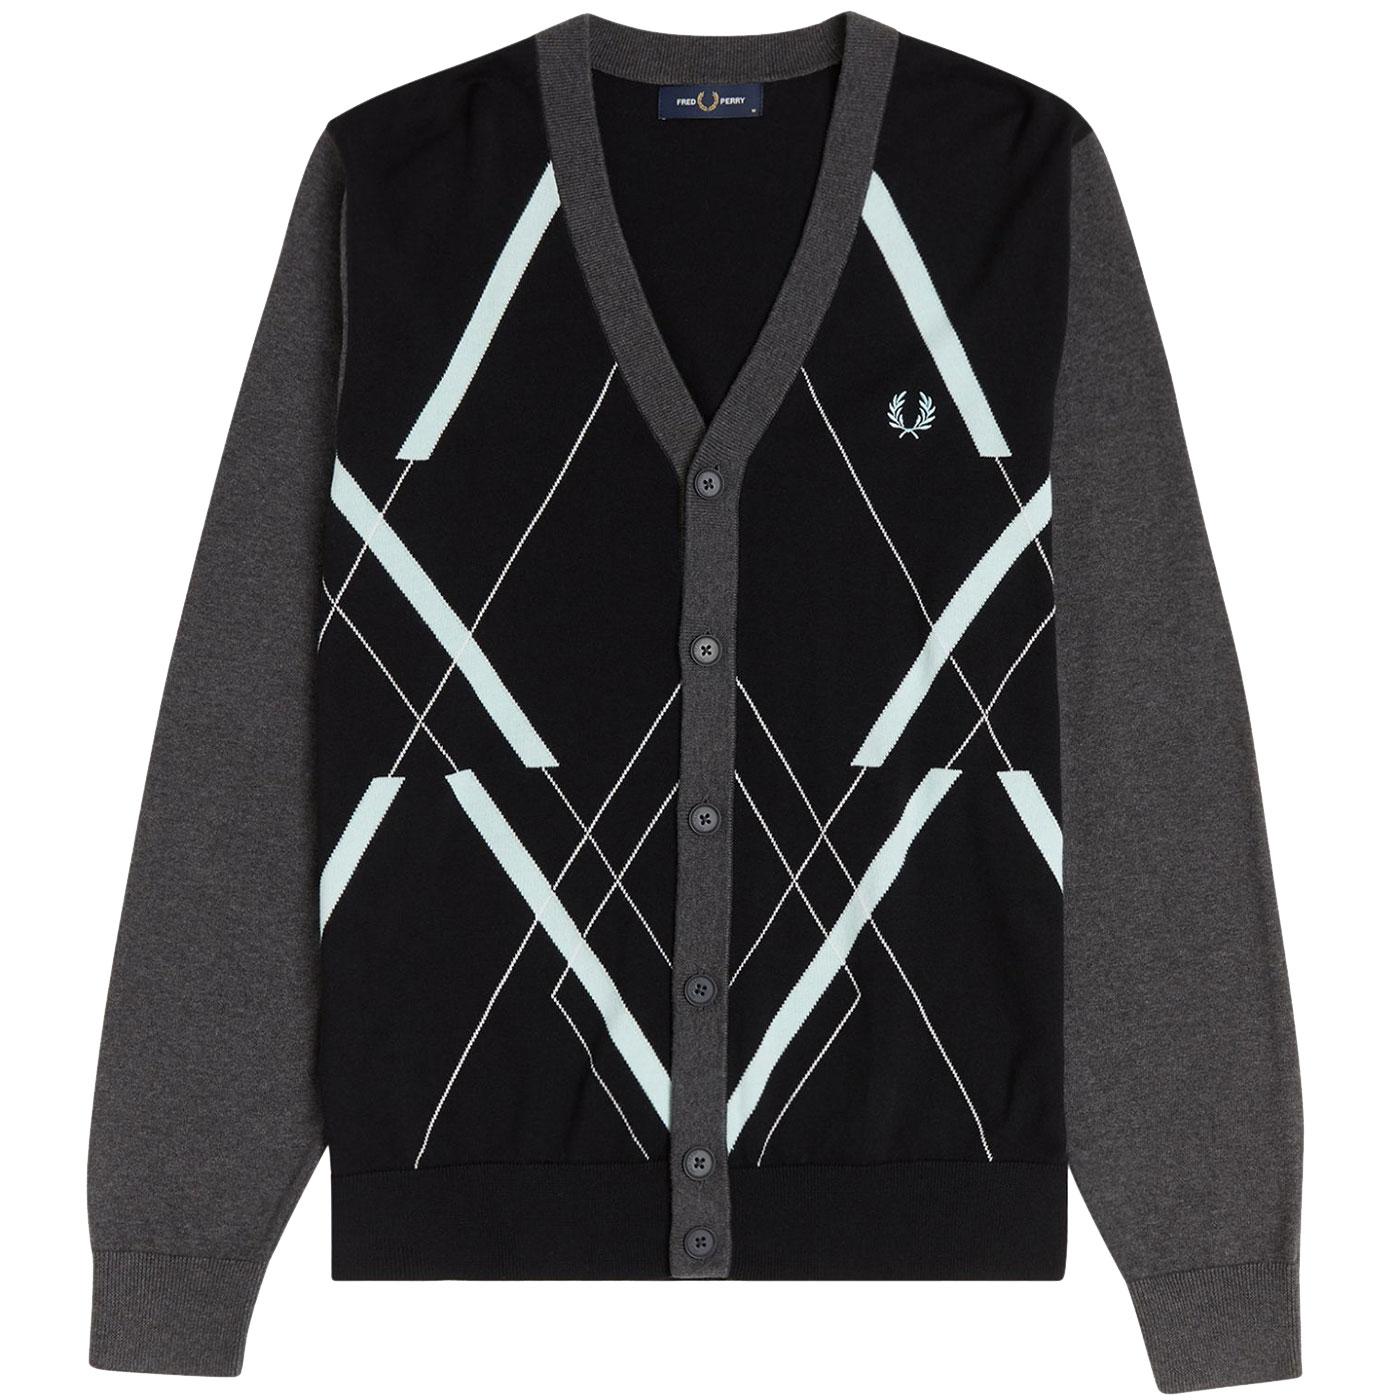 FRED PERRY Men's Abstract Argyle Knitted Cardigan